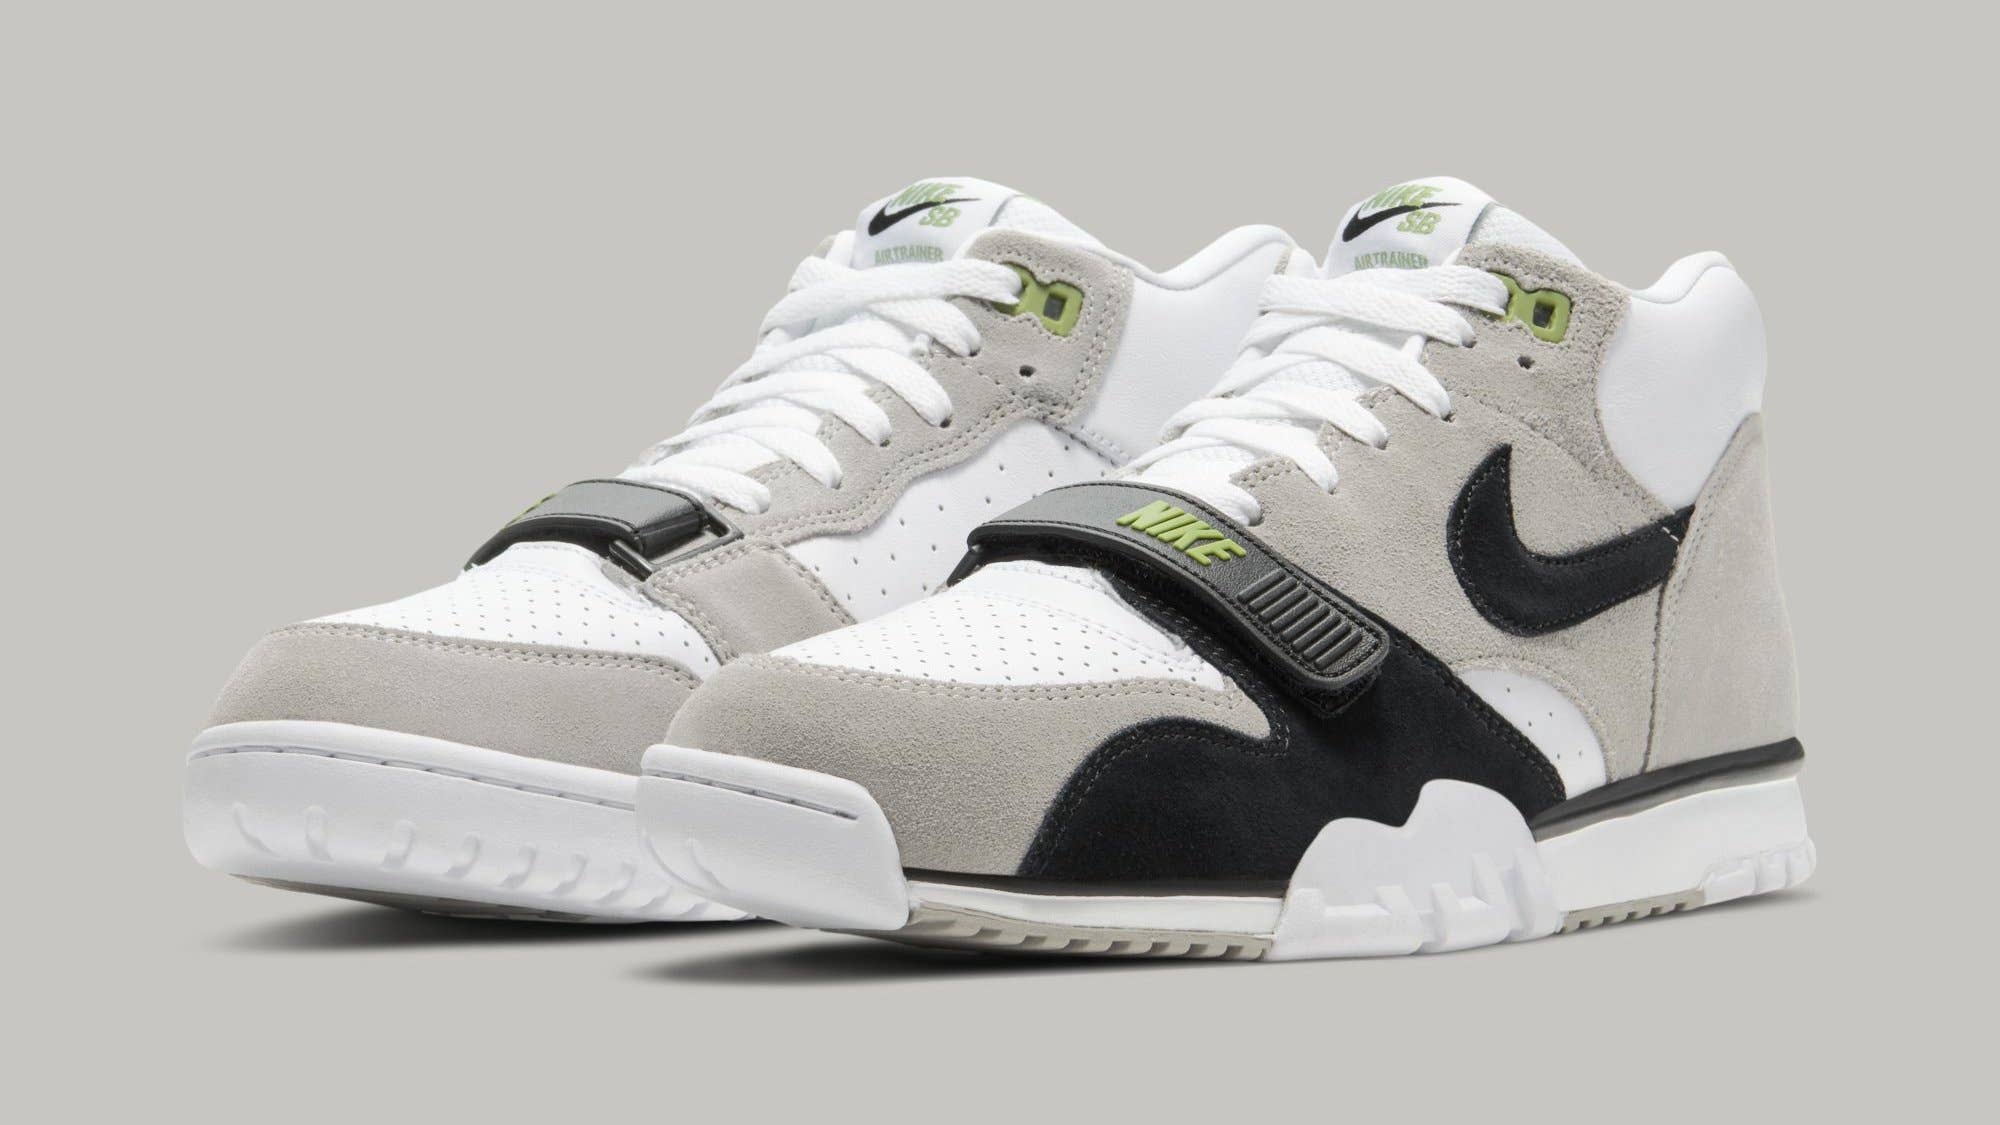 Nike SB Is Bringing Back the 'Chlorophyll' Air Trainer 1s |